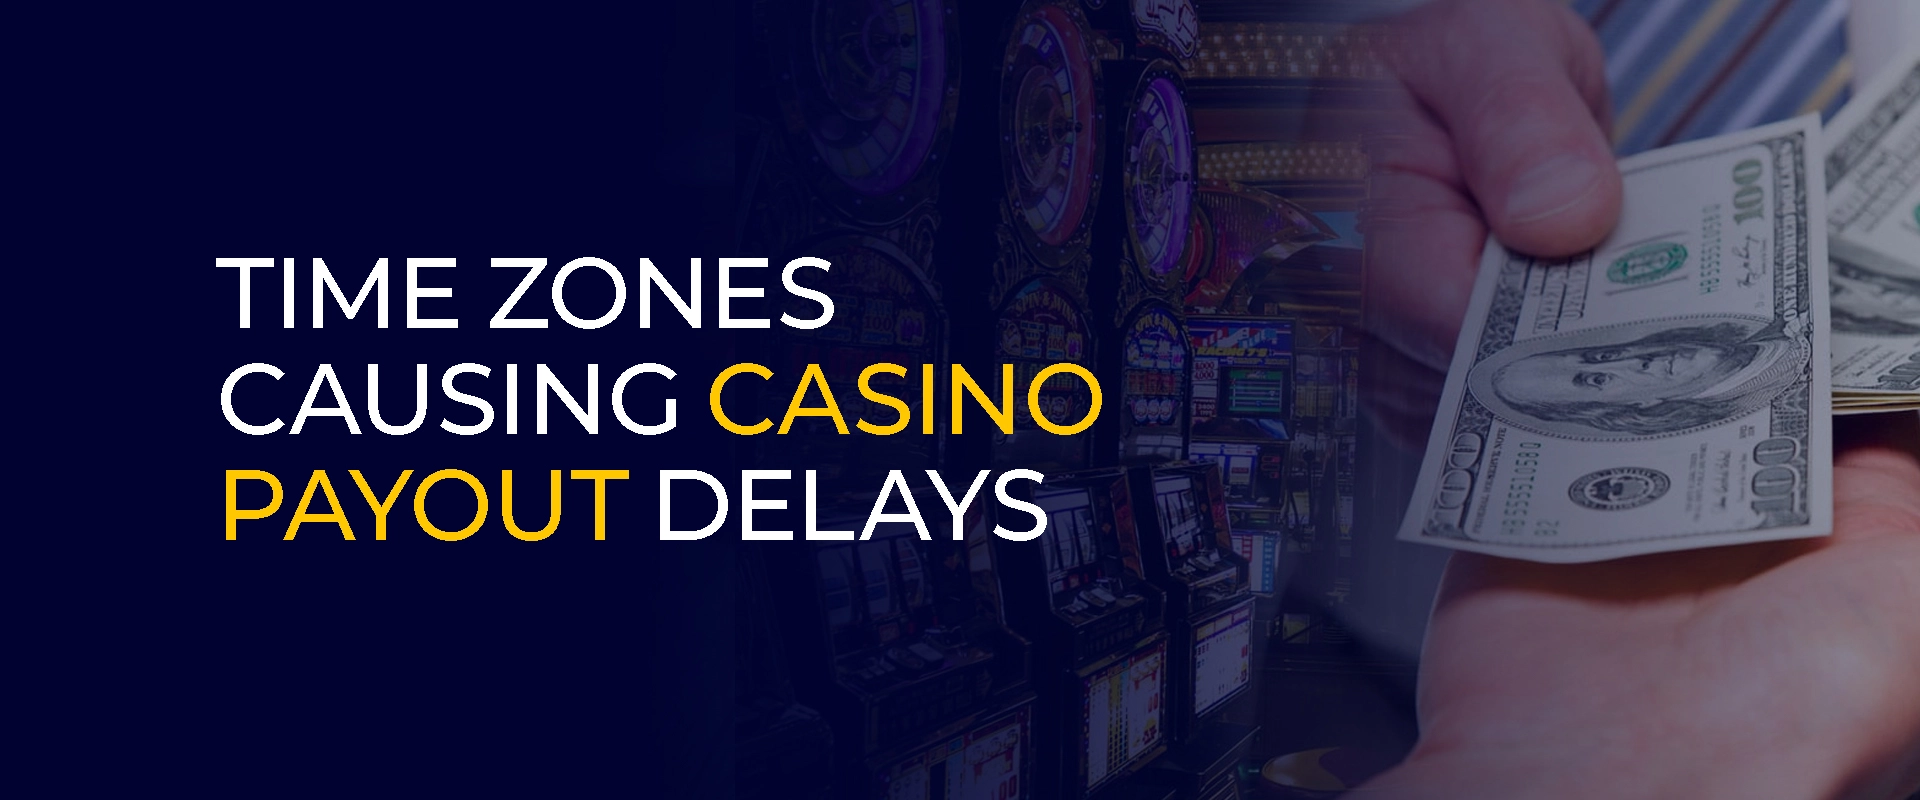 Time Zones Causing Casino Payout Delays